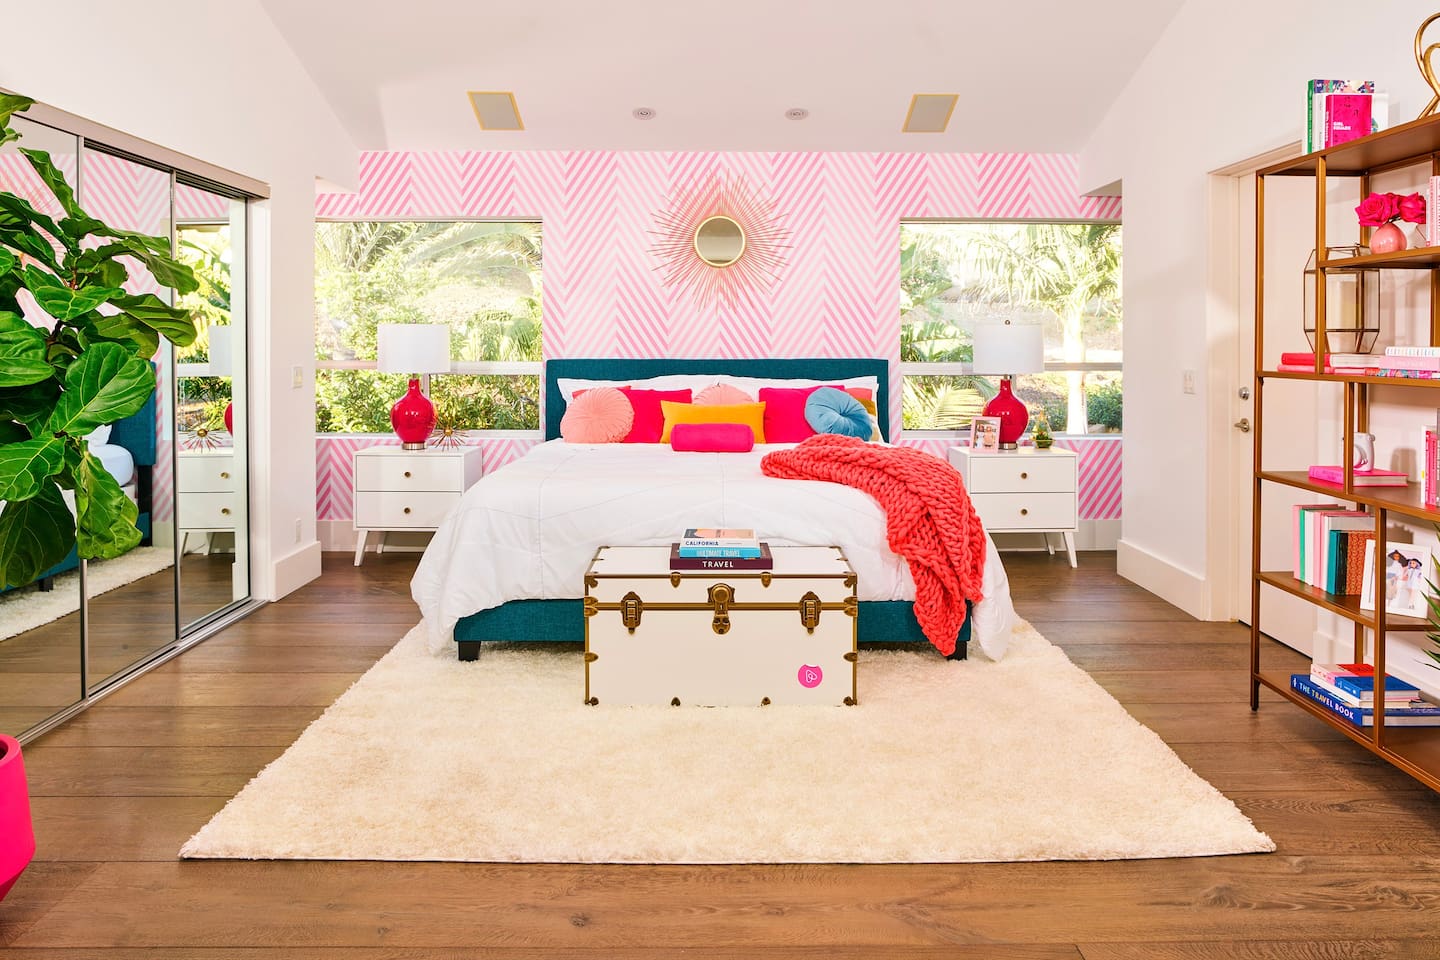 The master bedroom, where the best dreams are made. 